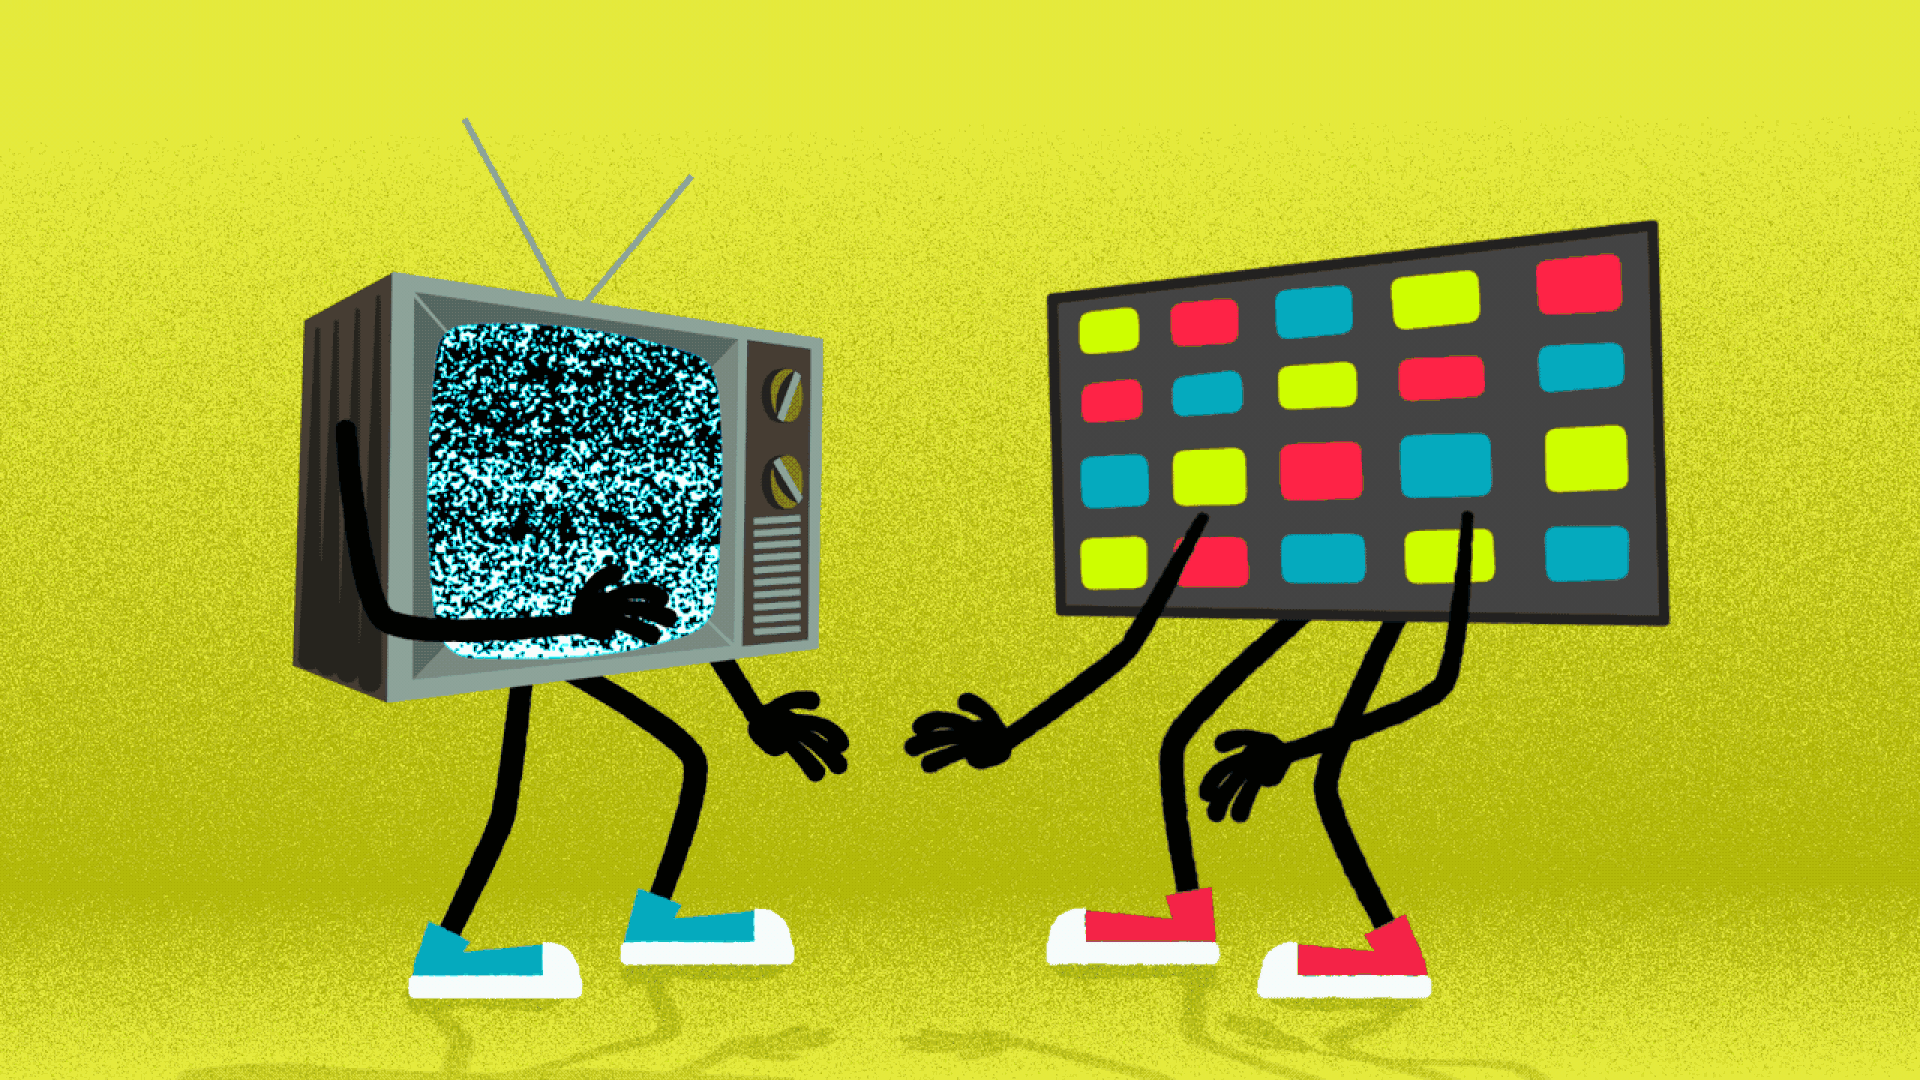 Illustration of an old cathode-ray tube TV in a fistfight with a smart TV. 